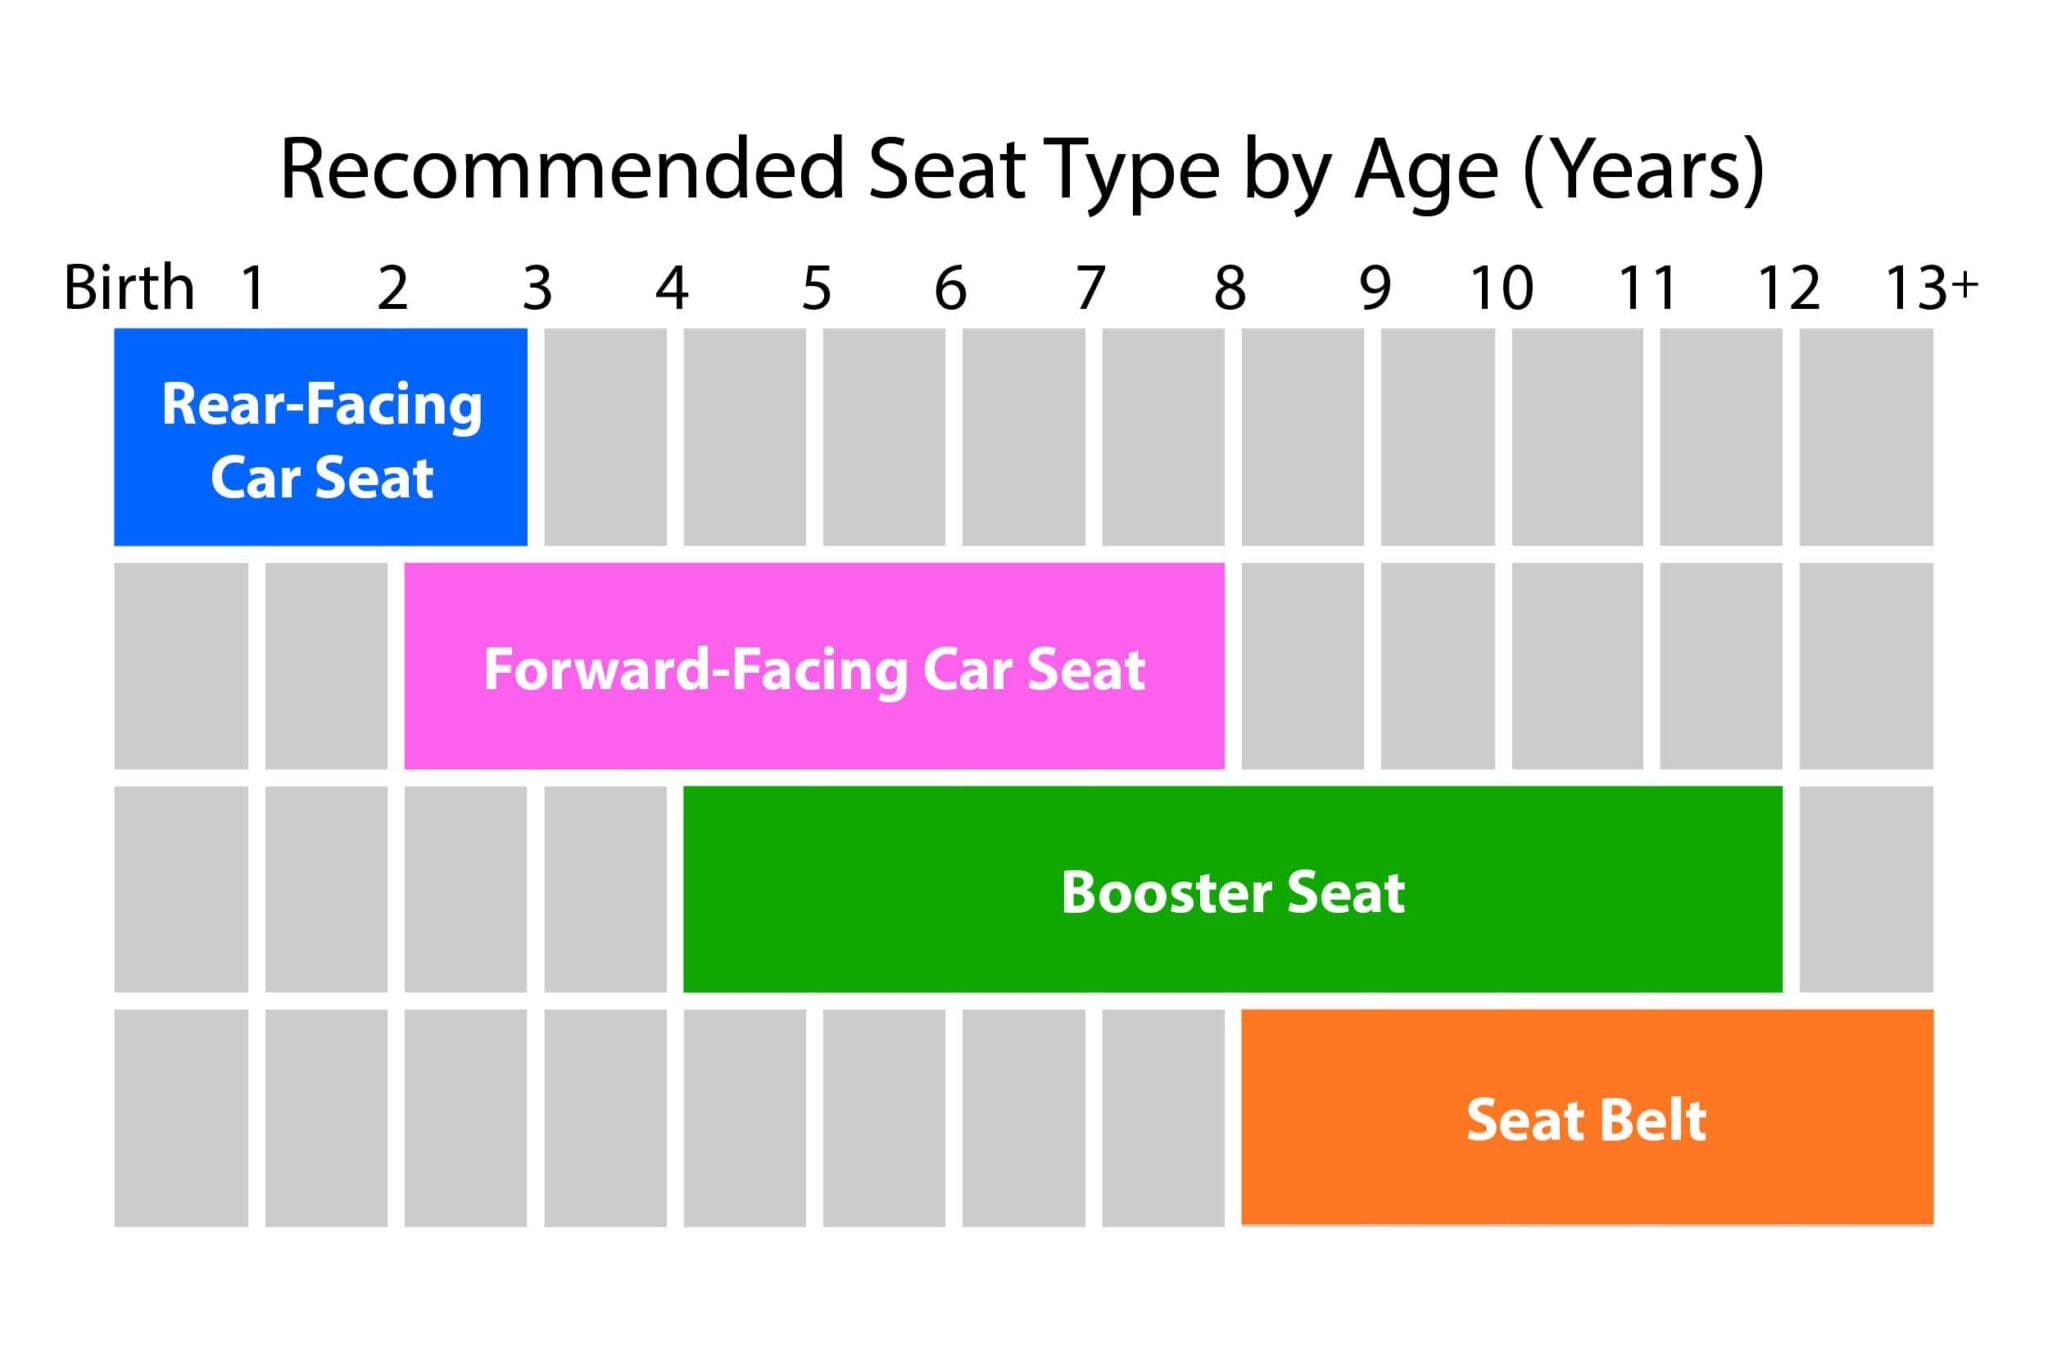 Image is white with colorful grid illustrating the 'Recommended Seat Types by Age (Years)'